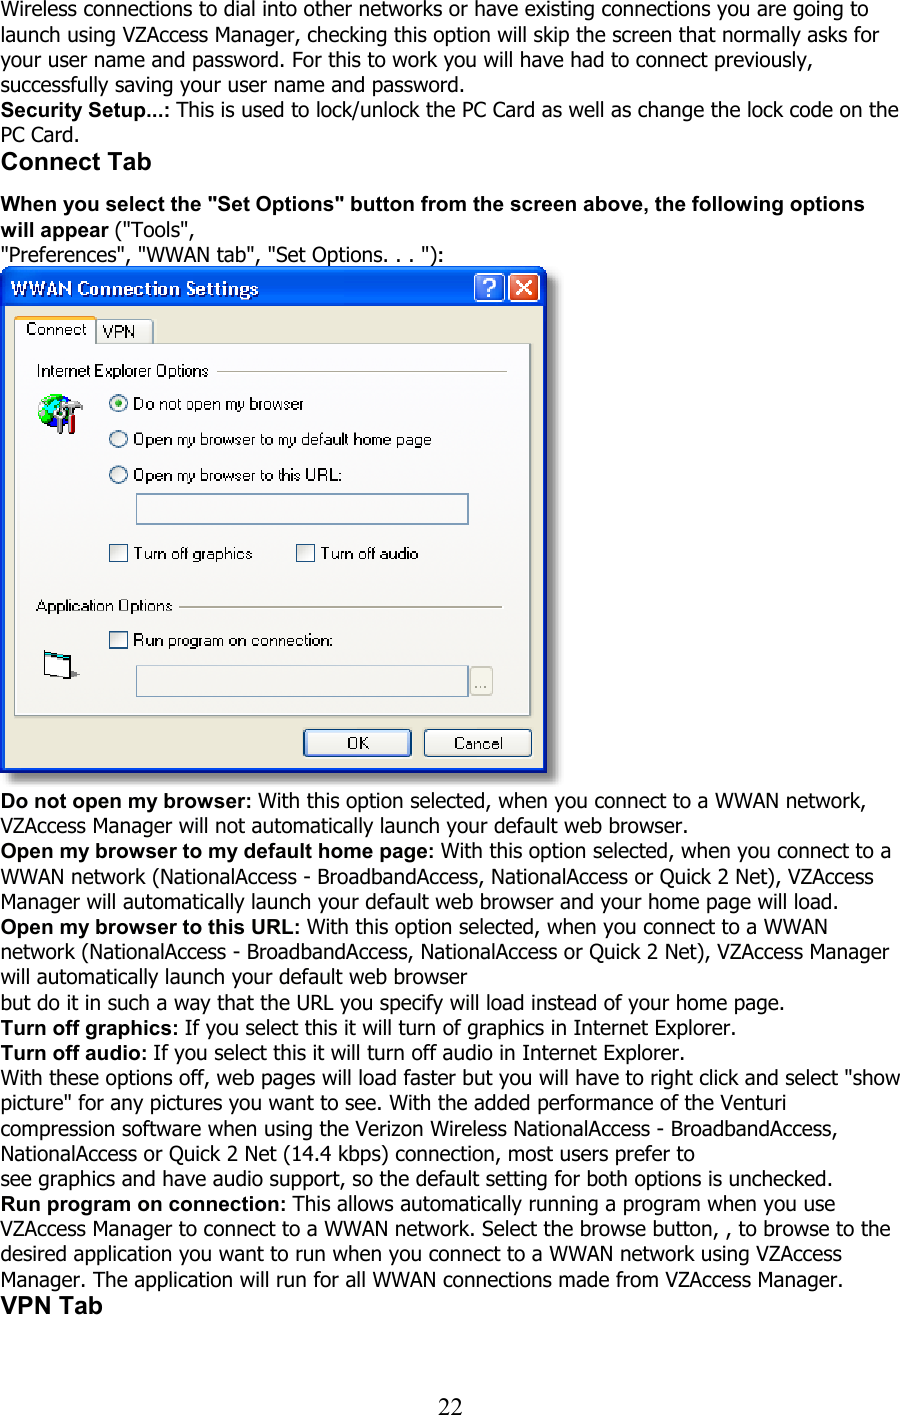  22Wireless connections to dial into other networks or have existing connections you are going to launch using VZAccess Manager, checking this option will skip the screen that normally asks for your user name and password. For this to work you will have had to connect previously, successfully saving your user name and password. Security Setup...: This is used to lock/unlock the PC Card as well as change the lock code on the PC Card. Connect Tab   When you select the &quot;Set Options&quot; button from the screen above, the following options will appear (&quot;Tools&quot;, &quot;Preferences&quot;, &quot;WWAN tab&quot;, &quot;Set Options. . . &quot;):  Do not open my browser: With this option selected, when you connect to a WWAN network, VZAccess Manager will not automatically launch your default web browser. Open my browser to my default home page: With this option selected, when you connect to a WWAN network (NationalAccess - BroadbandAccess, NationalAccess or Quick 2 Net), VZAccess Manager will automatically launch your default web browser and your home page will load. Open my browser to this URL: With this option selected, when you connect to a WWAN network (NationalAccess - BroadbandAccess, NationalAccess or Quick 2 Net), VZAccess Manager will automatically launch your default web browser but do it in such a way that the URL you specify will load instead of your home page. Turn off graphics: If you select this it will turn of graphics in Internet Explorer. Turn off audio: If you select this it will turn off audio in Internet Explorer. With these options off, web pages will load faster but you will have to right click and select &quot;show picture&quot; for any pictures you want to see. With the added performance of the Venturi compression software when using the Verizon Wireless NationalAccess - BroadbandAccess, NationalAccess or Quick 2 Net (14.4 kbps) connection, most users prefer to see graphics and have audio support, so the default setting for both options is unchecked. Run program on connection: This allows automatically running a program when you use VZAccess Manager to connect to a WWAN network. Select the browse button, , to browse to the desired application you want to run when you connect to a WWAN network using VZAccess Manager. The application will run for all WWAN connections made from VZAccess Manager. VPN Tab  